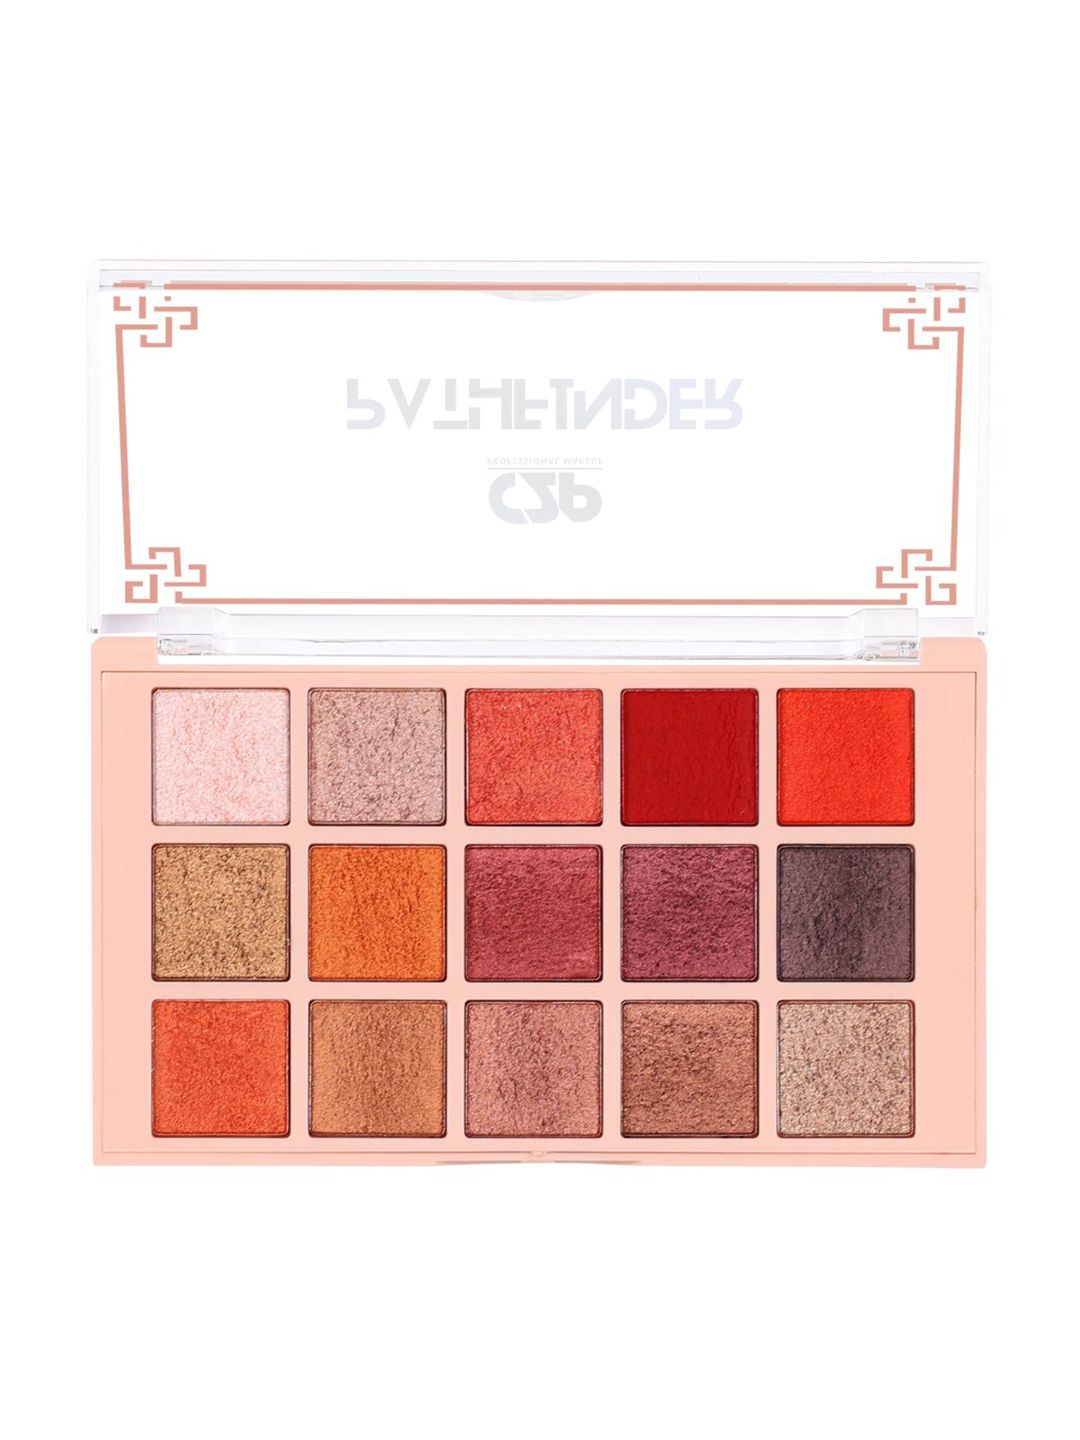 C2P PROFESSIONAL MAKEUP Pathfinder 15 Color Eyeshadow Palette - Cherry Fuzz 04 Price in India